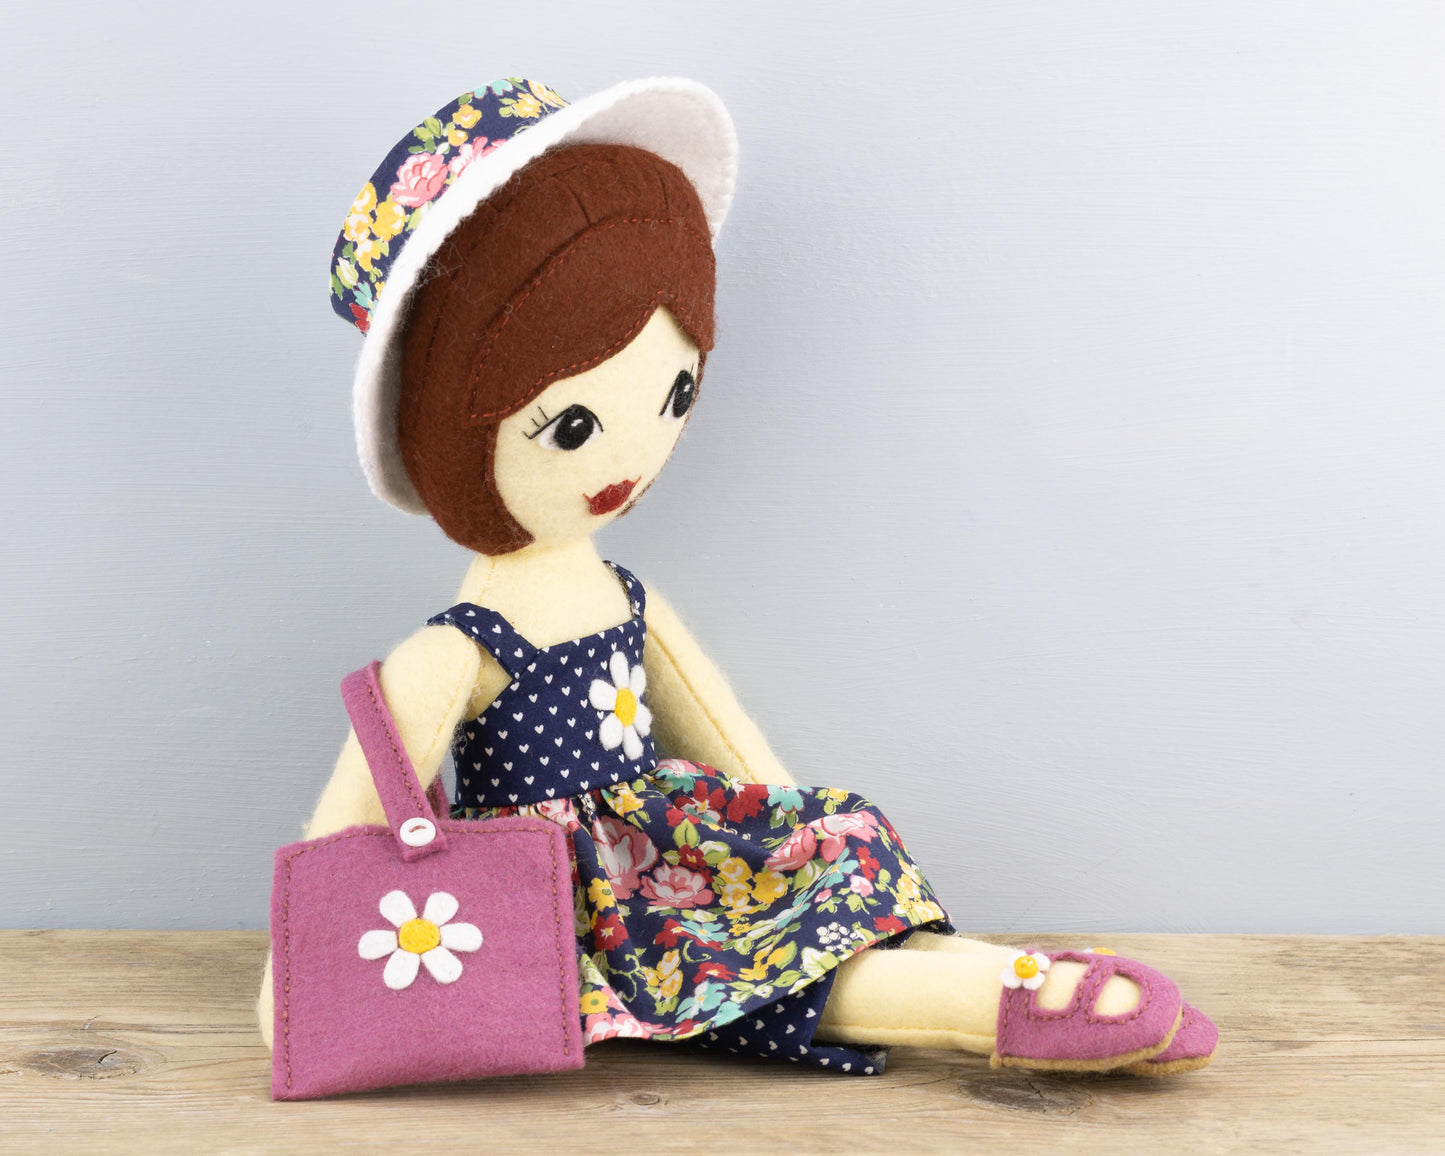 Tilly Doll with Summer & Autumn Outfits Pattern Bundle